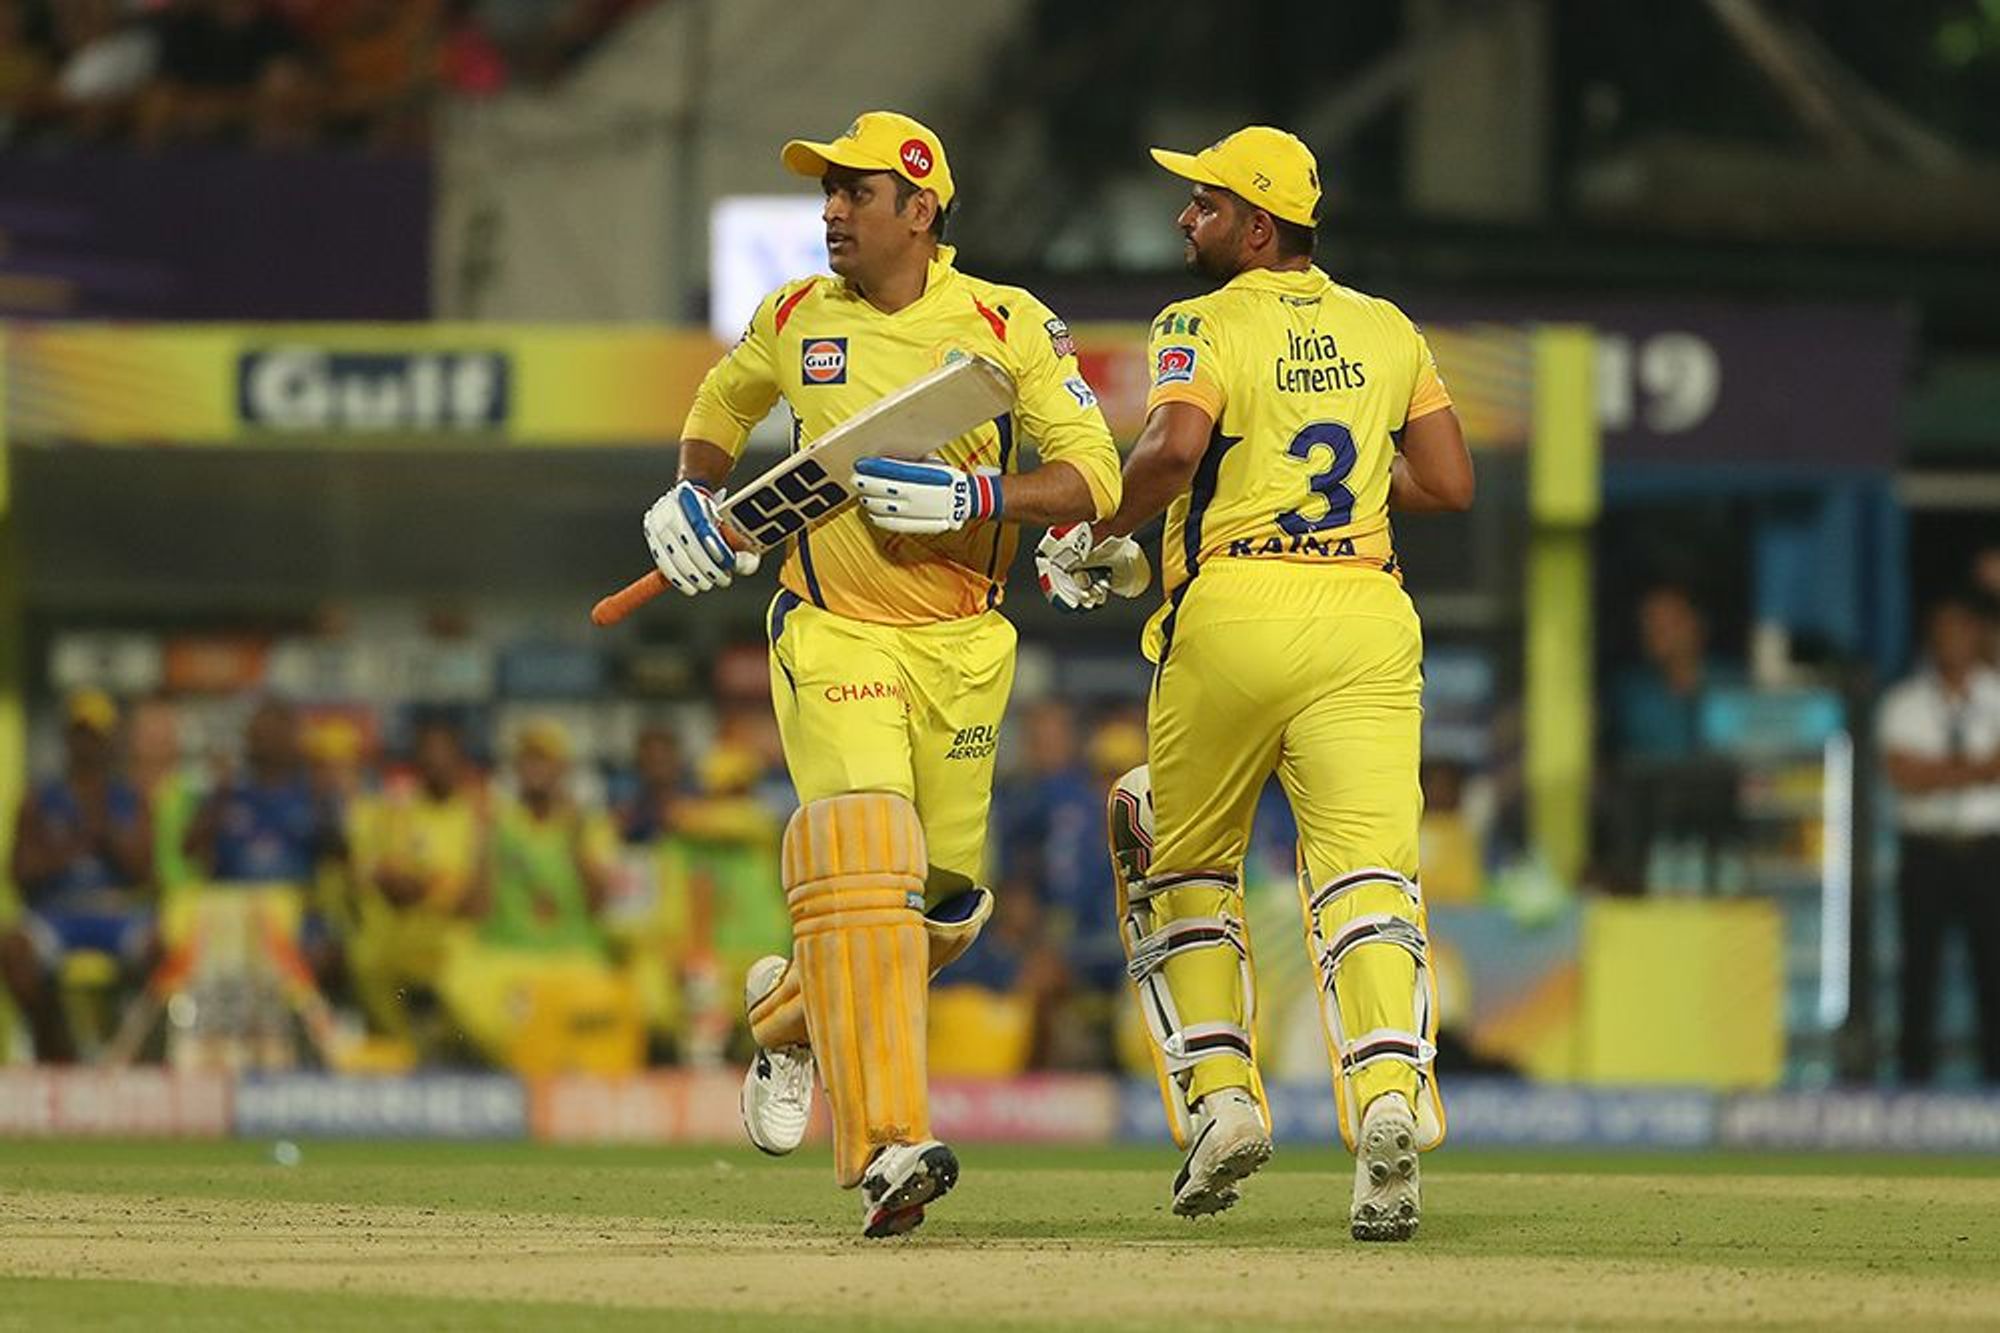 MS Dhoni and Suresh Raina for CSK in IPL 2019 | IANS